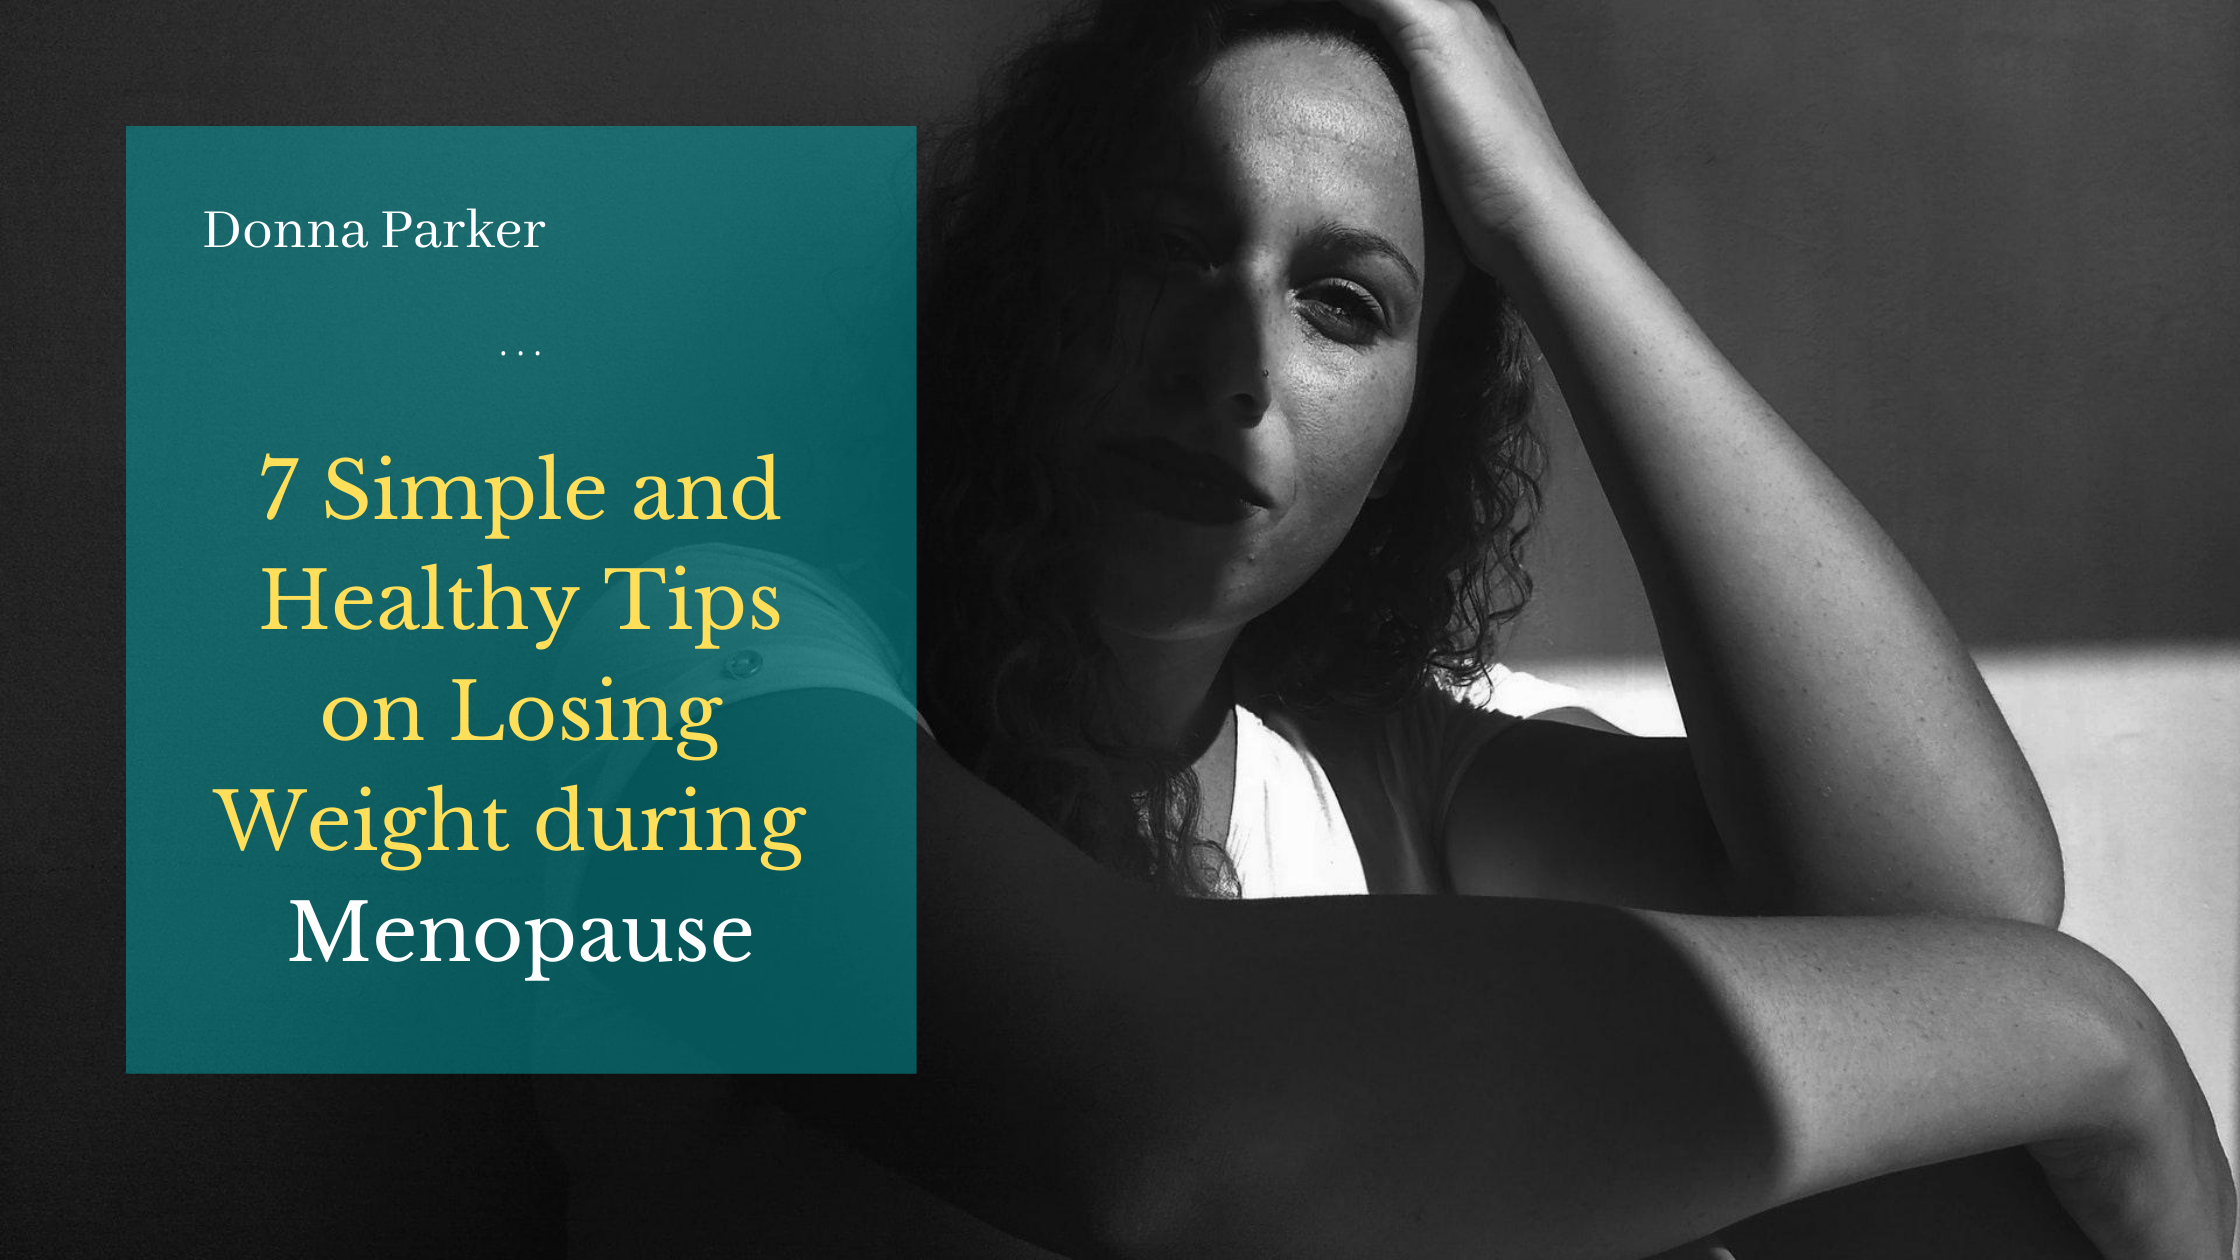 A photo of a woman leaning on a wall with 7 Simple and Healthy Tips on Losing Weight during Menopause.